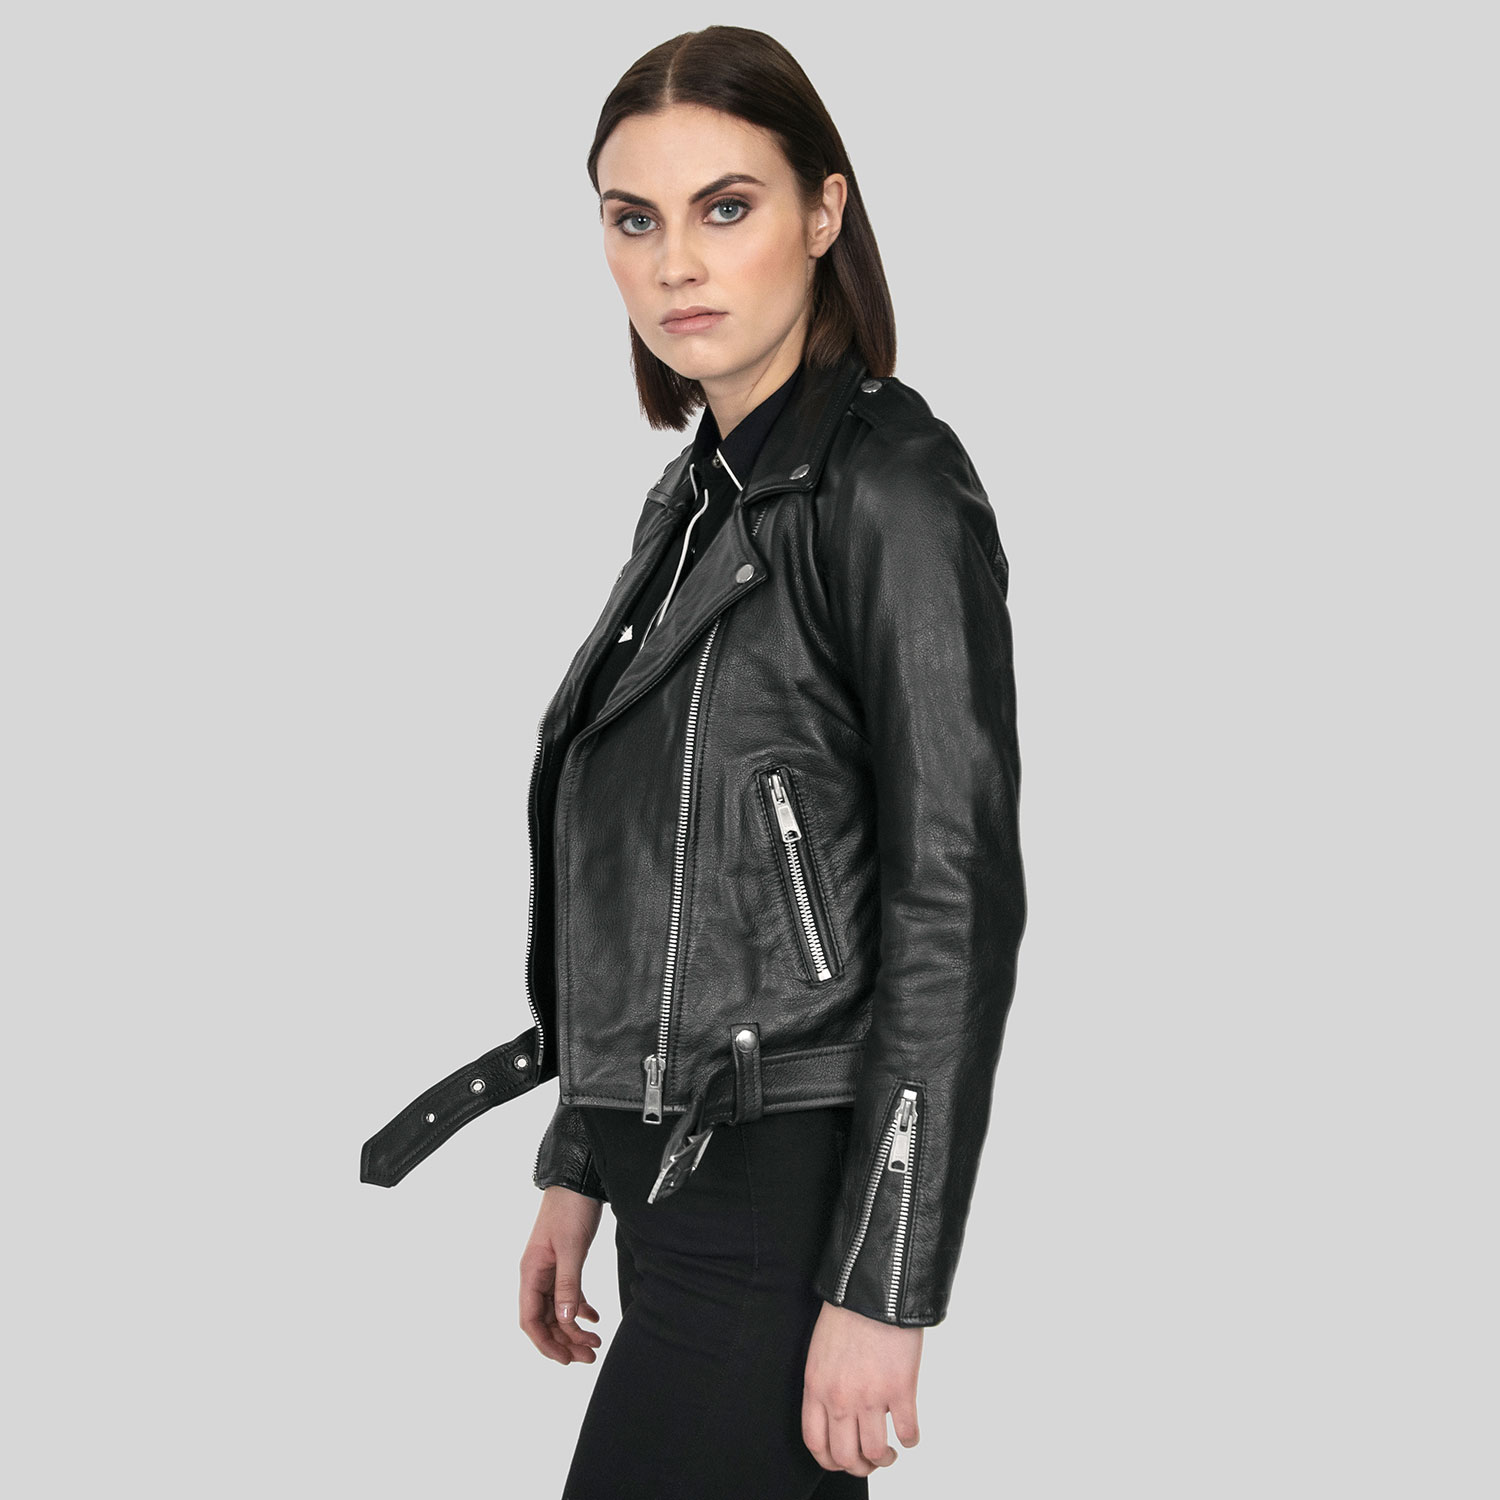 Hell Black - To - Straight and | Nickel - Commando Lining Black Jacket Apparel Leather